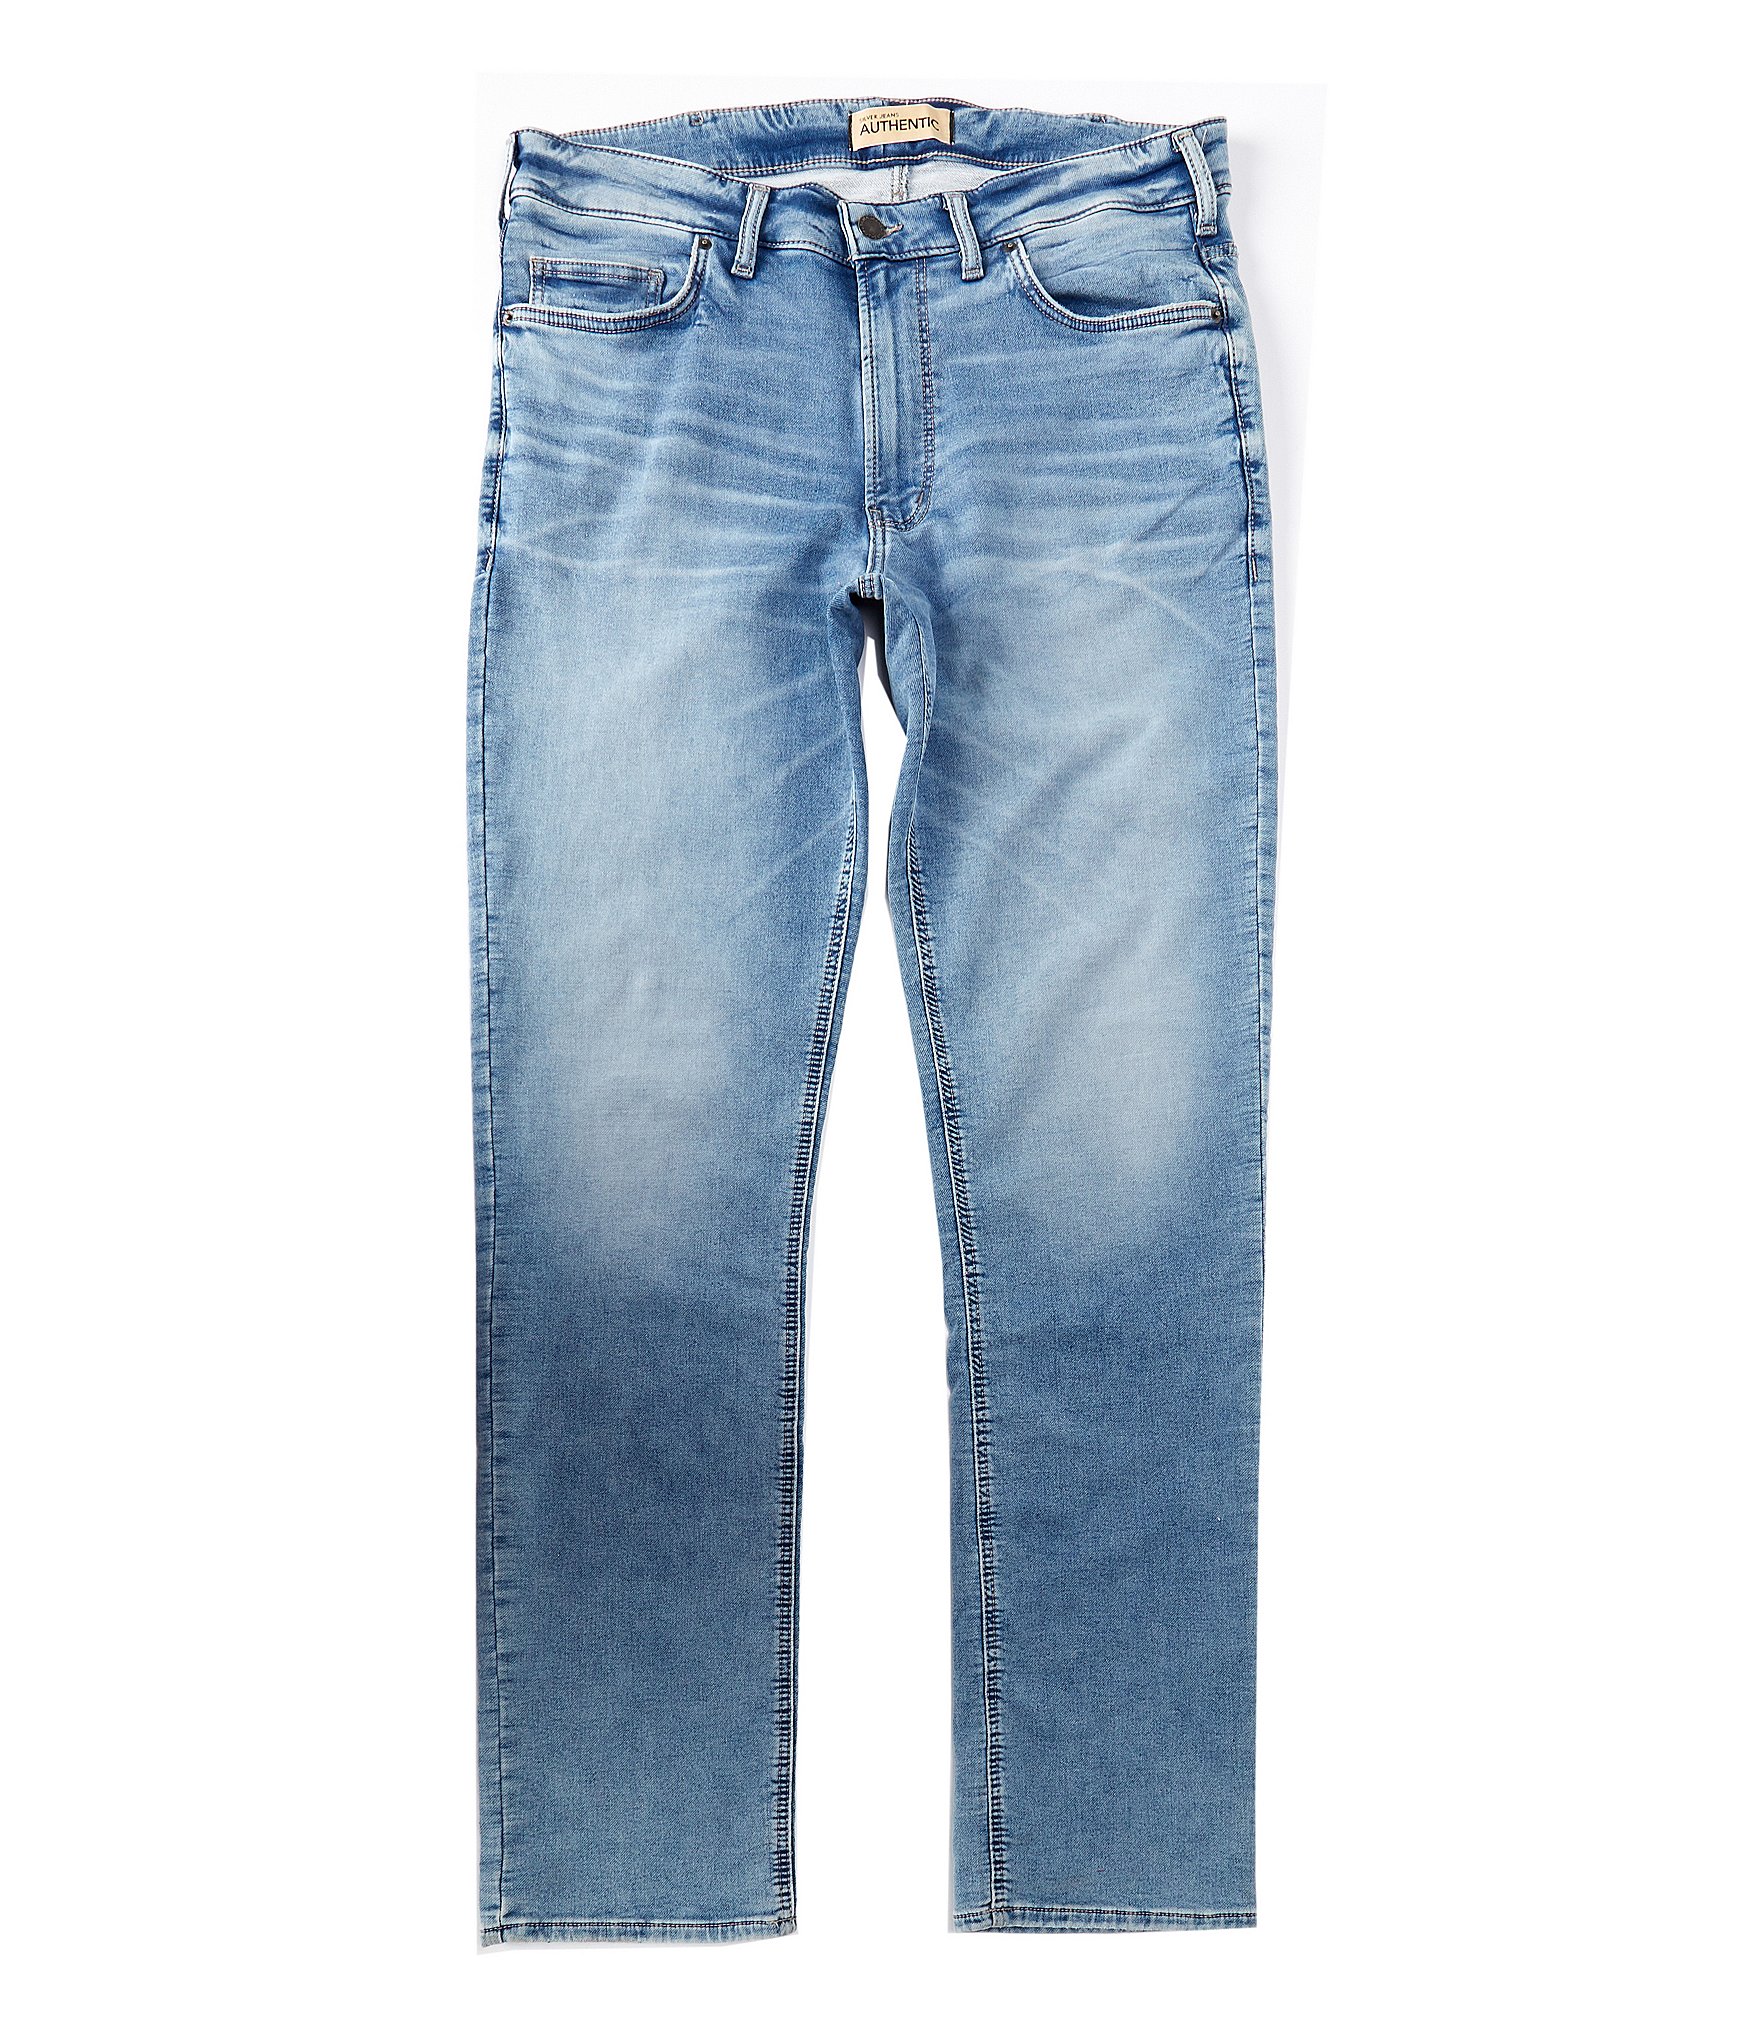 mens fashion shopping Jeans by urbantouch - urban clothing co.